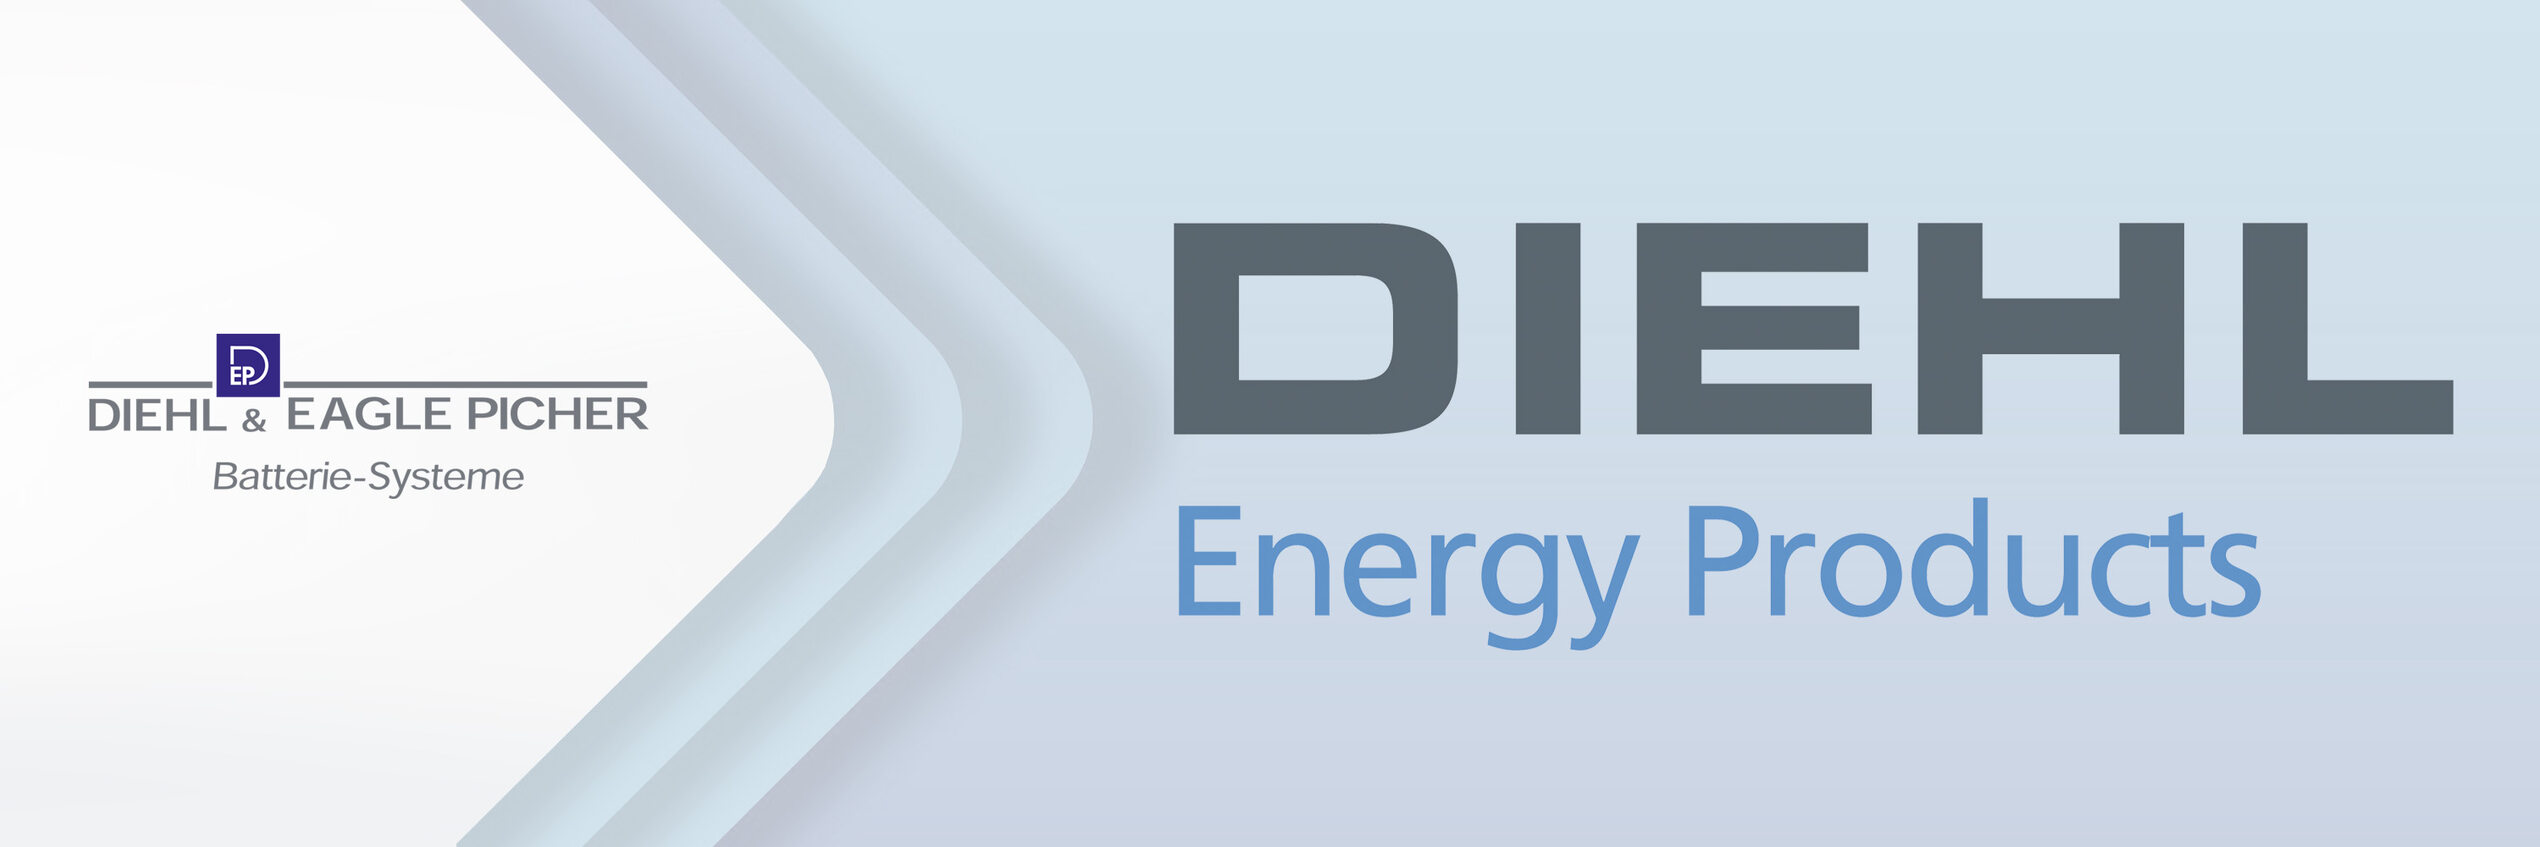 Diehl Defence continues to lead its subsidiary with strategically important Battery Product Segment as sole shareholder